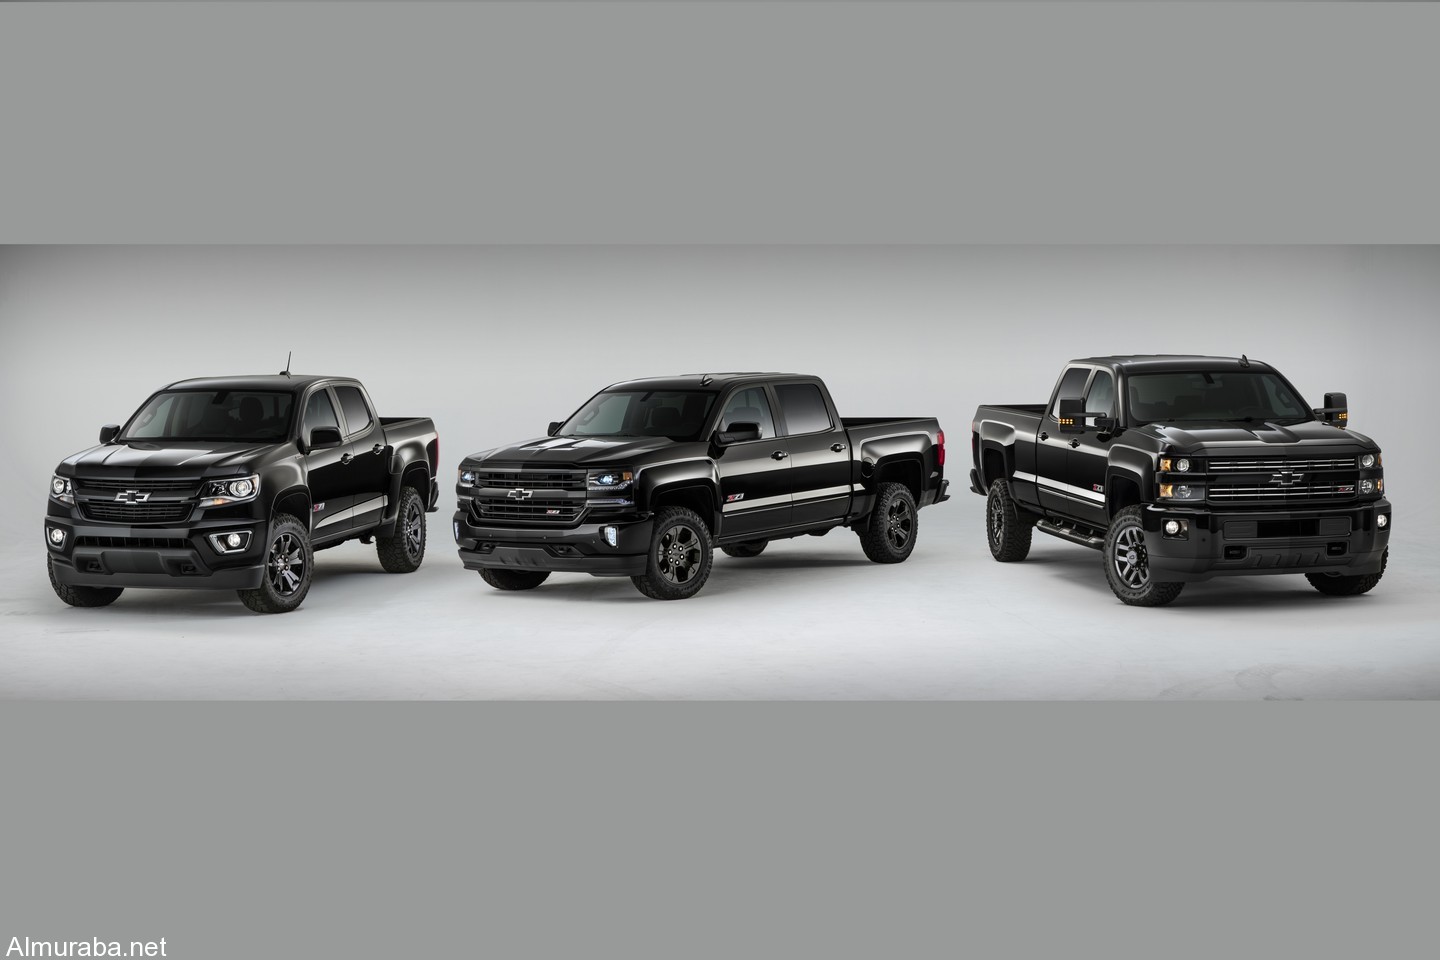 For 2016, Chevrolet will offer three Z71 Midnight Special editio